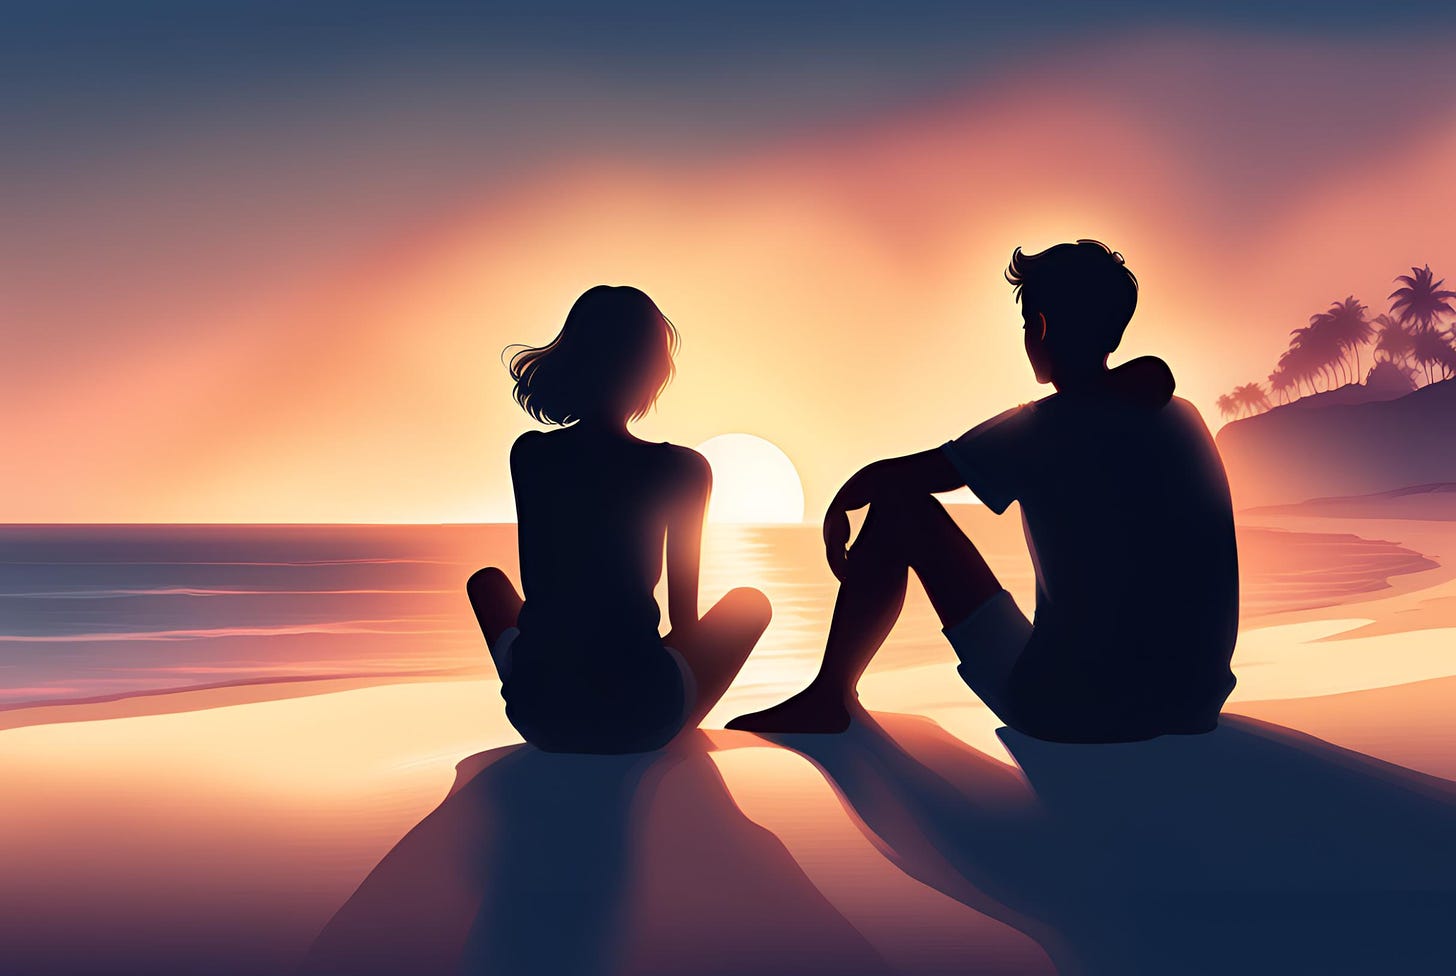 Illustration of a two friends sitting near each other on a beach